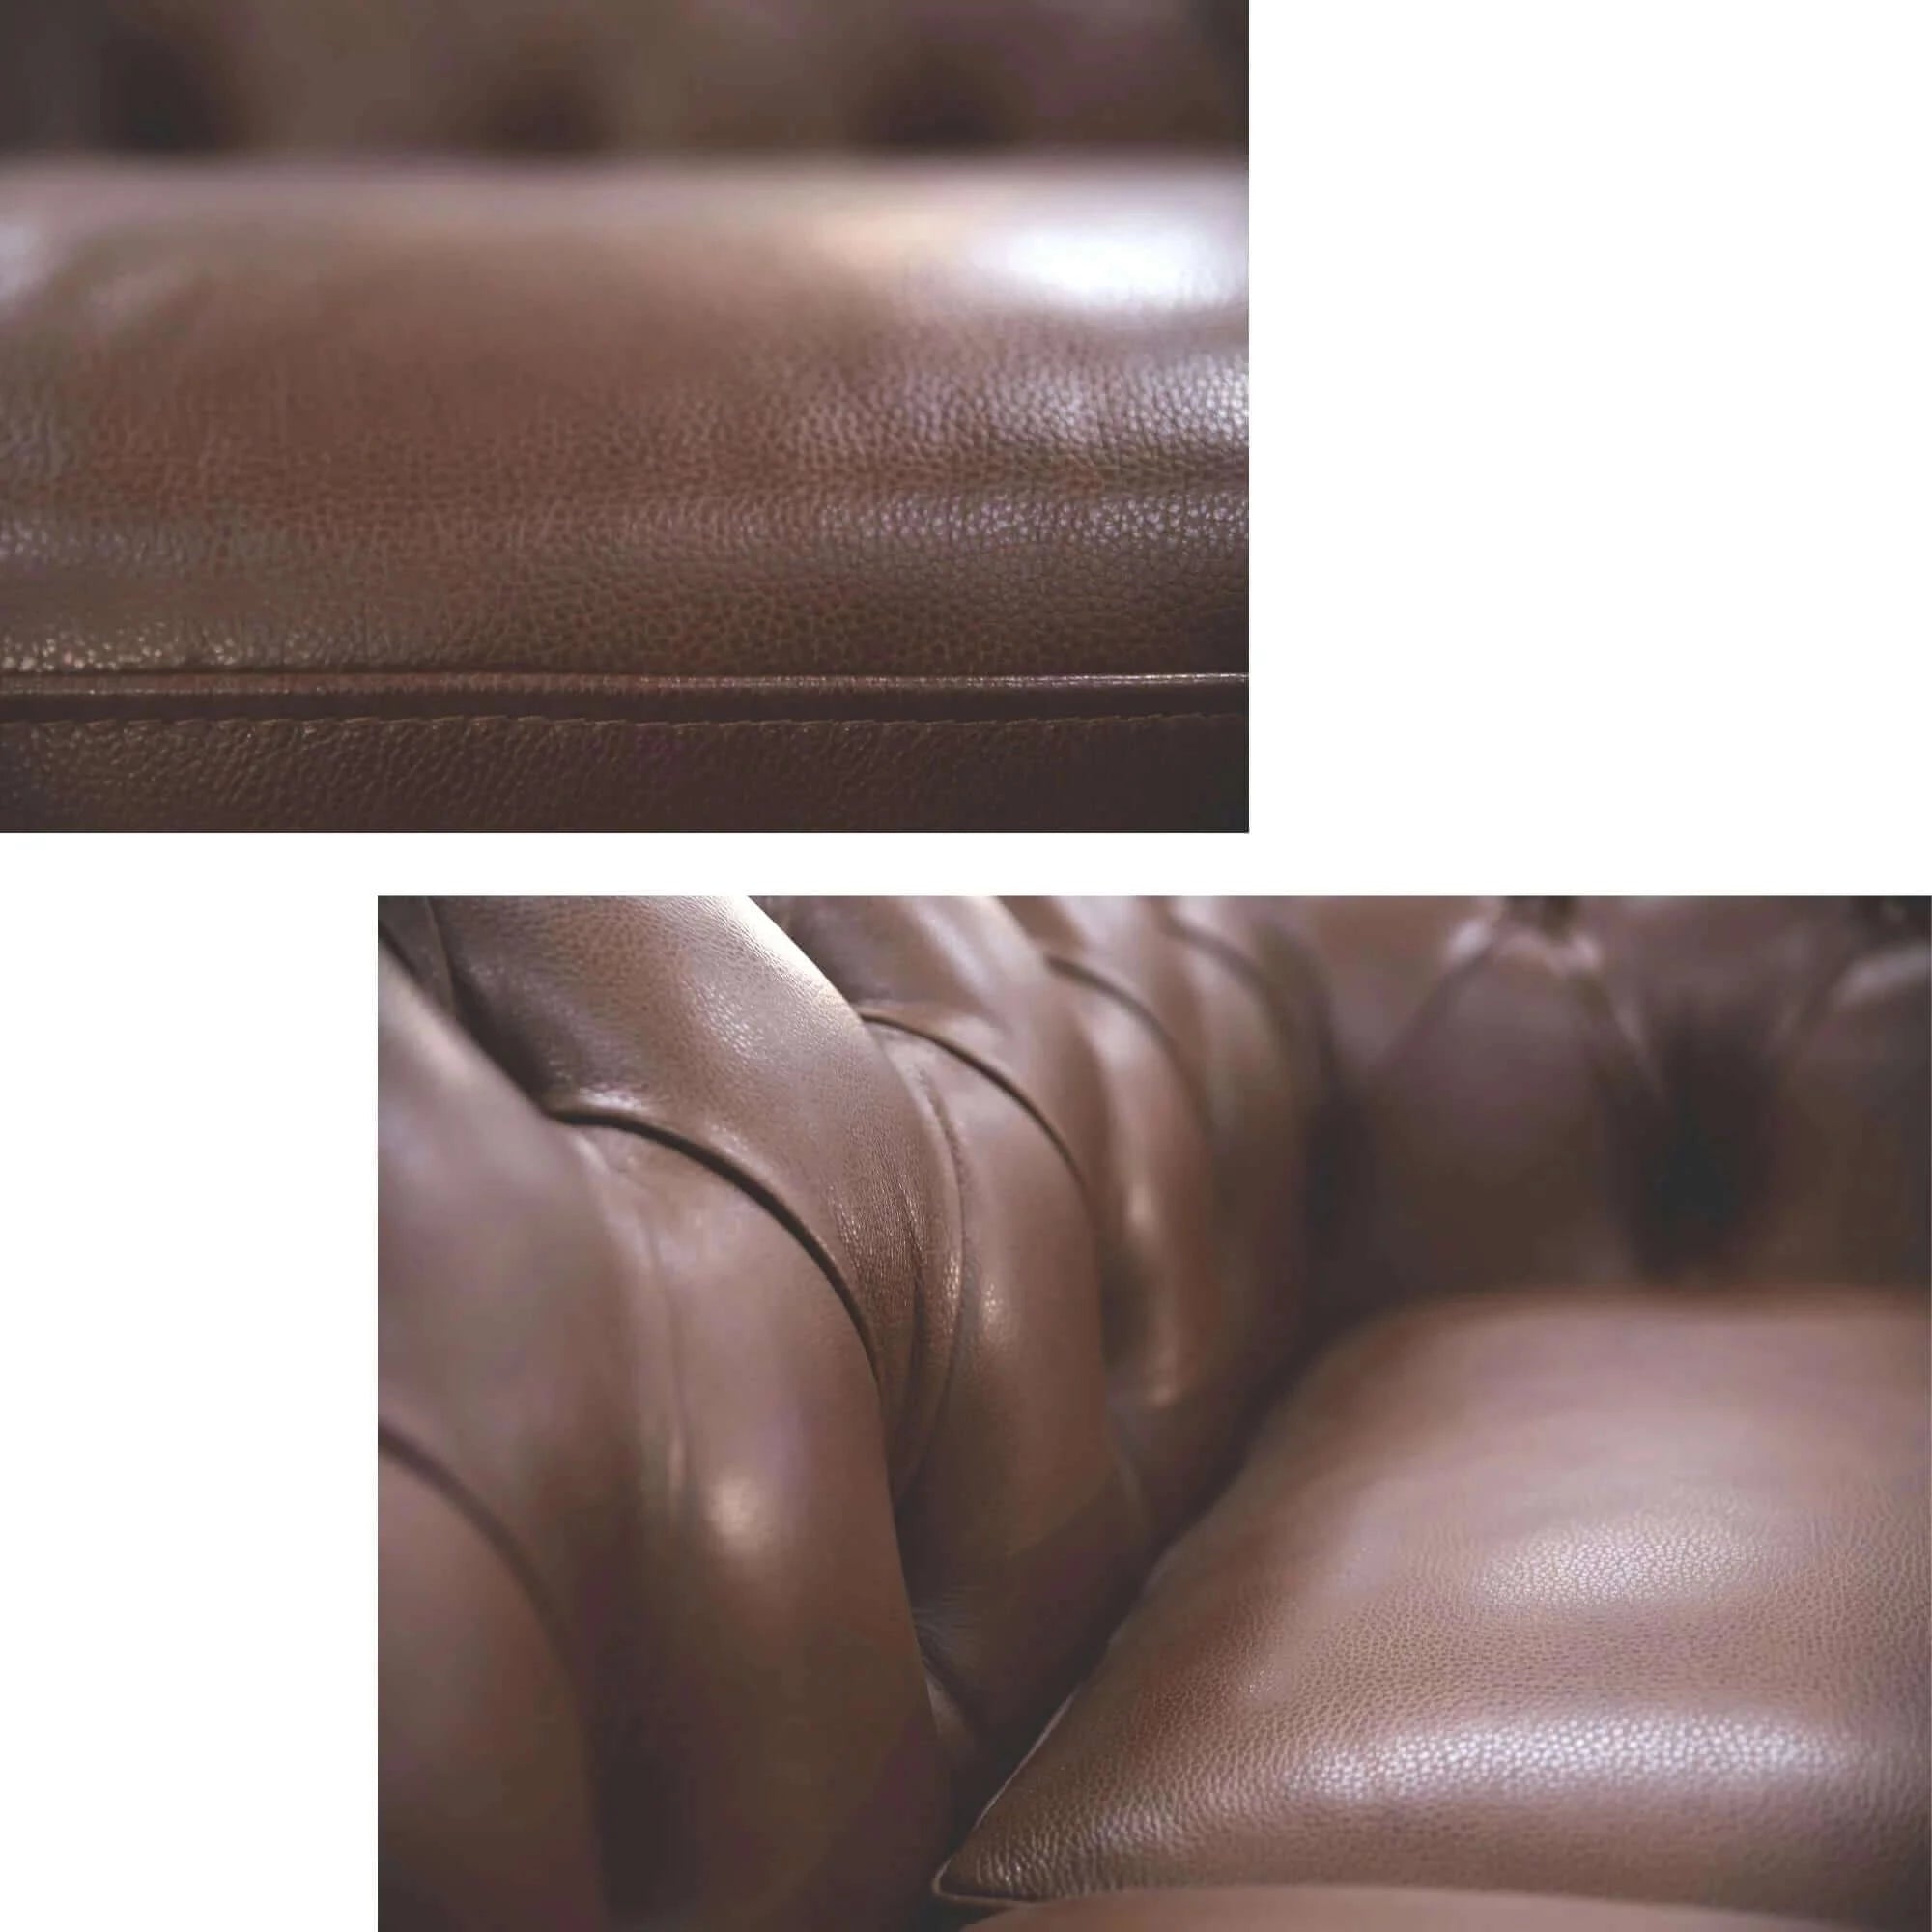 Buy sonny 3+1 seater genuine leather sofa chestfield lounge couch - butterscotch - upinteriors-Upinteriors